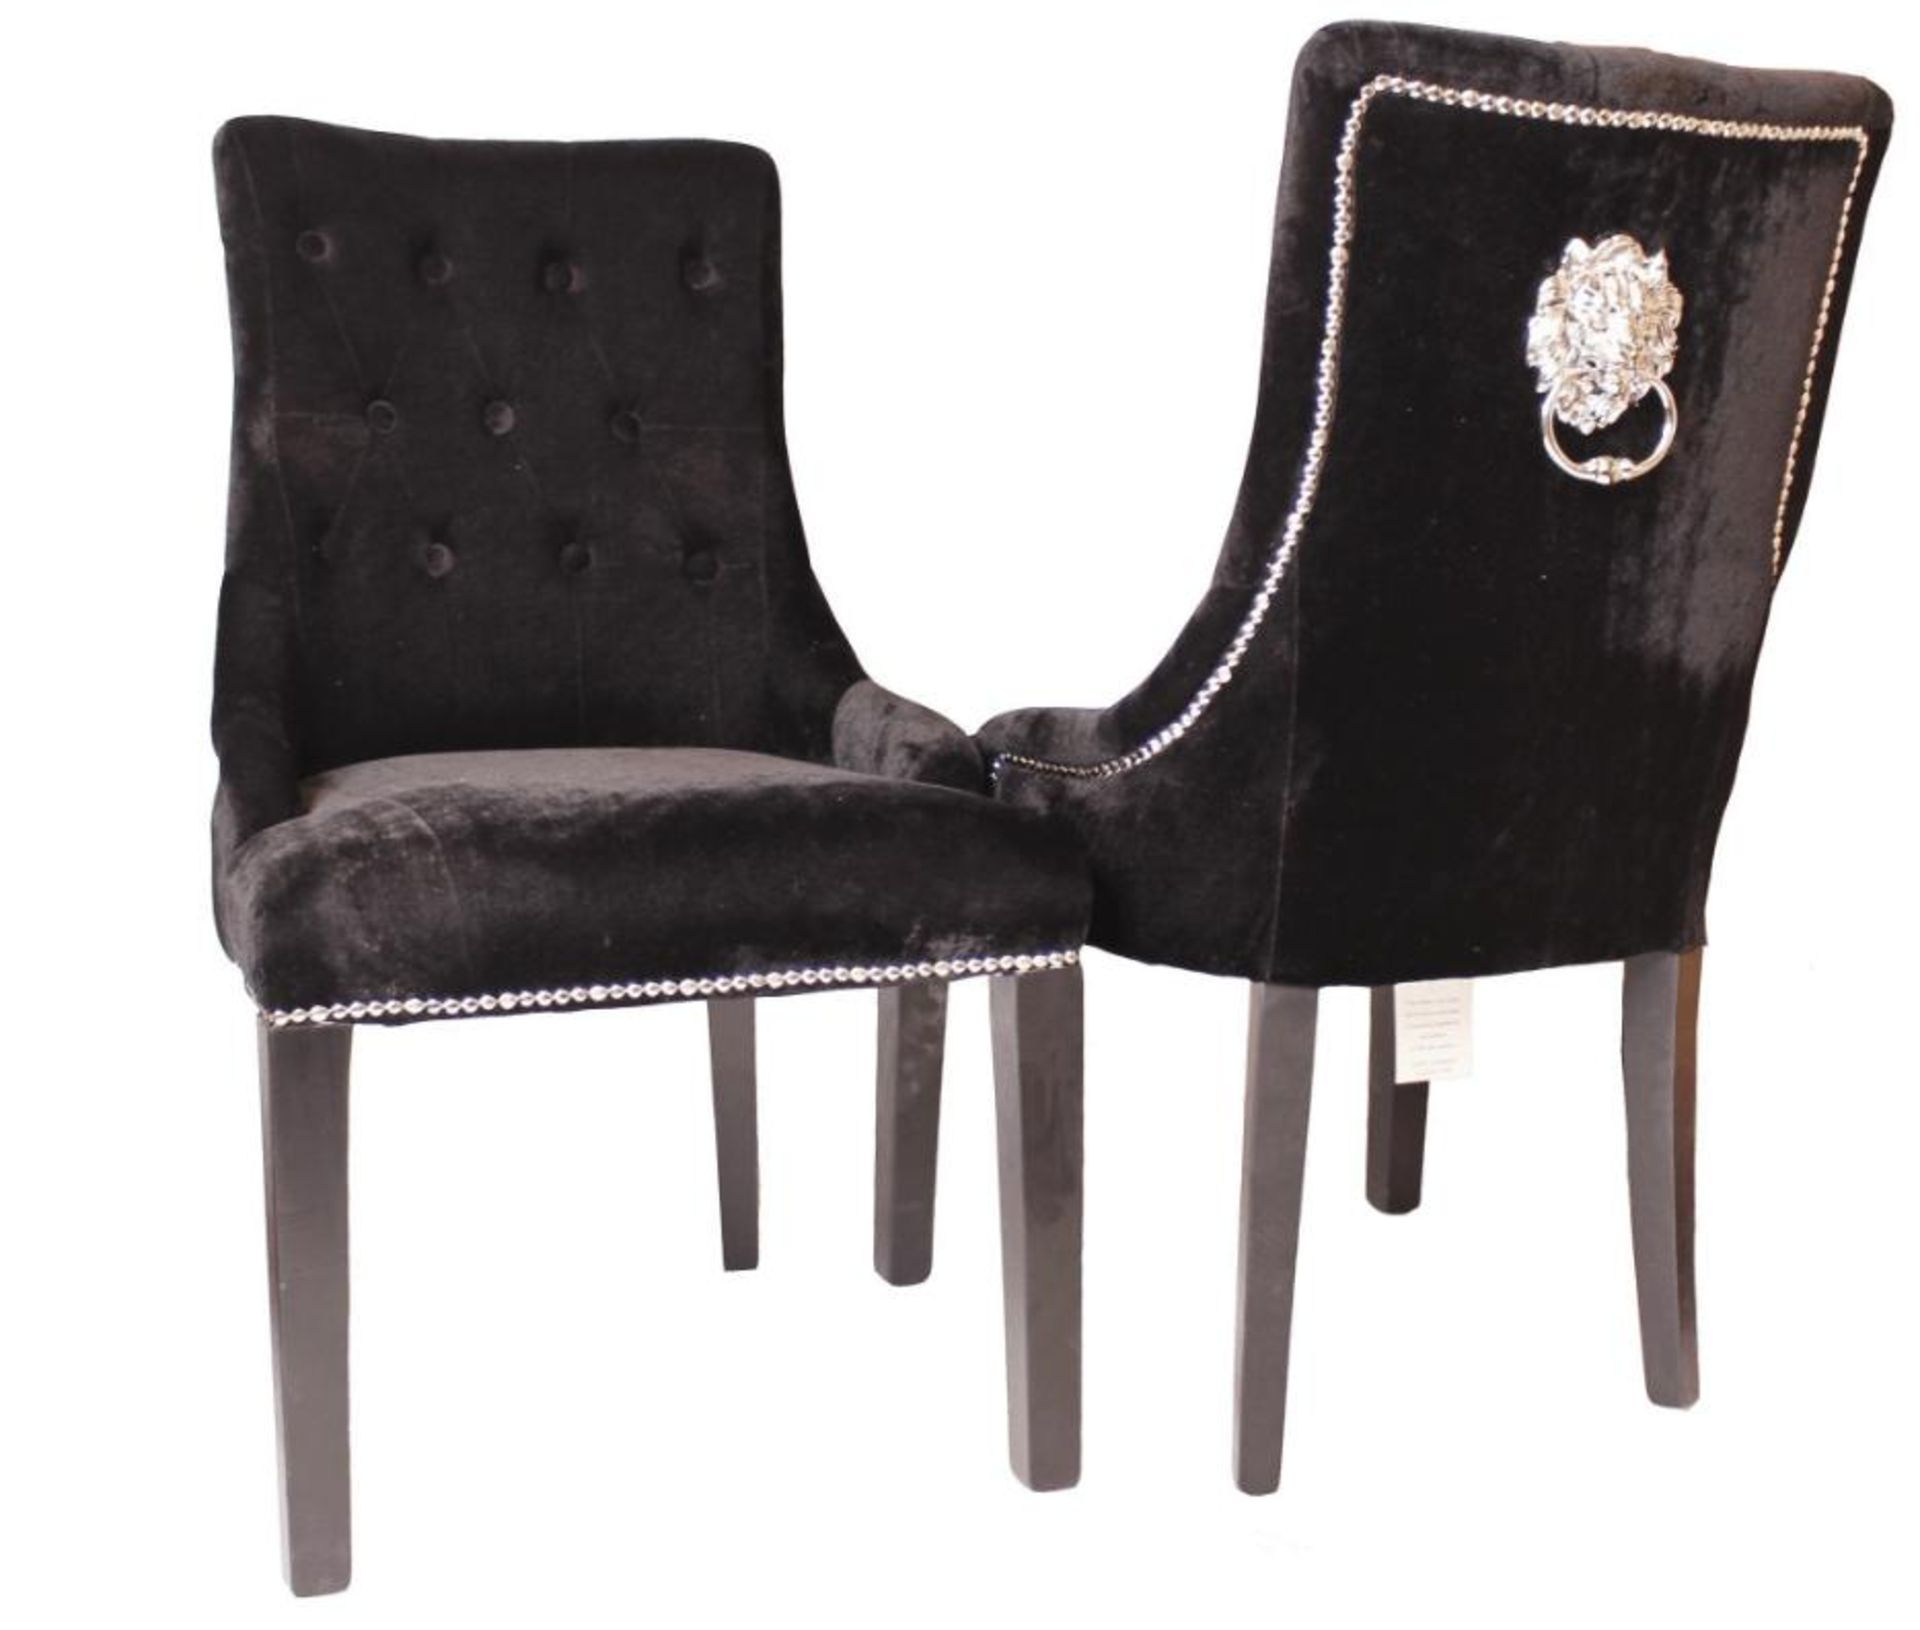 6 x HOUSE OF SPARKLES Luxury Vintage-style Button-Back LION Dining Chairs In A Light Grey Velvet